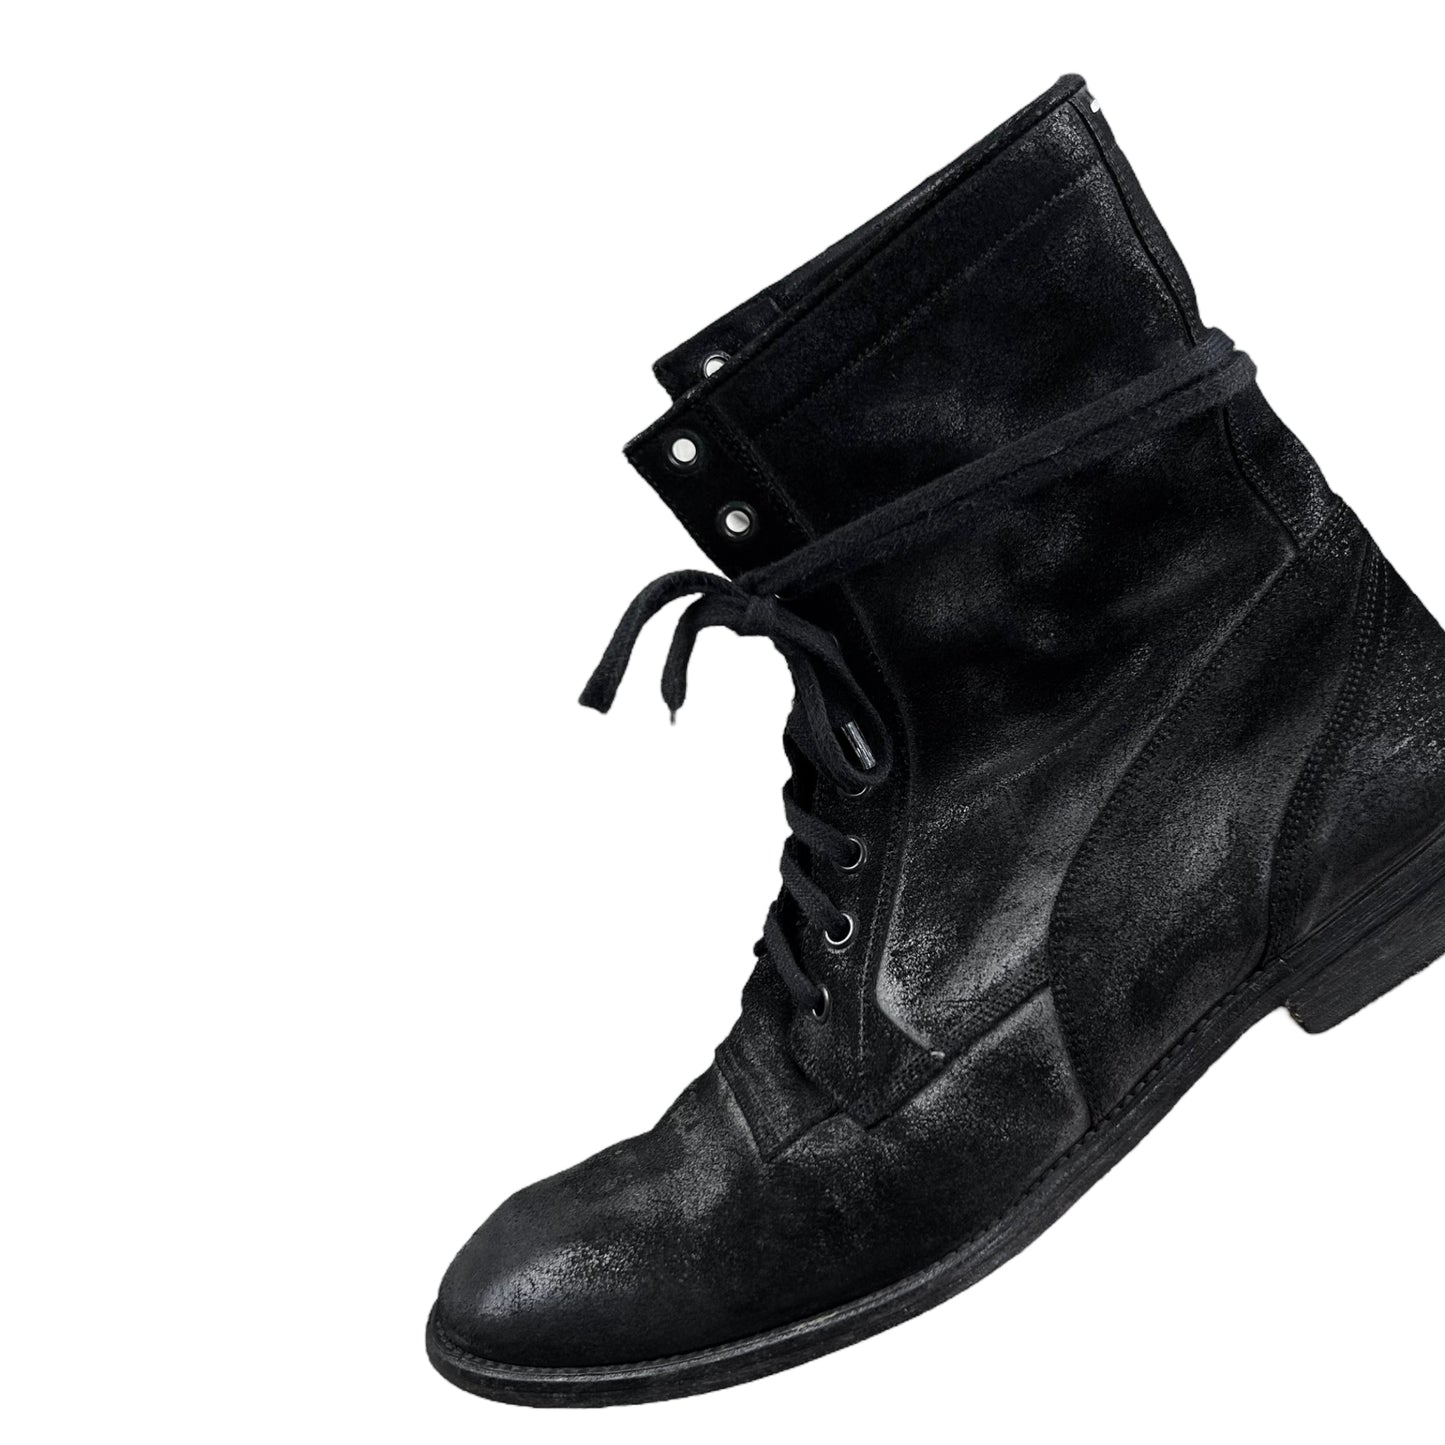 Maison Martin Margiela Distressed Suede Boots